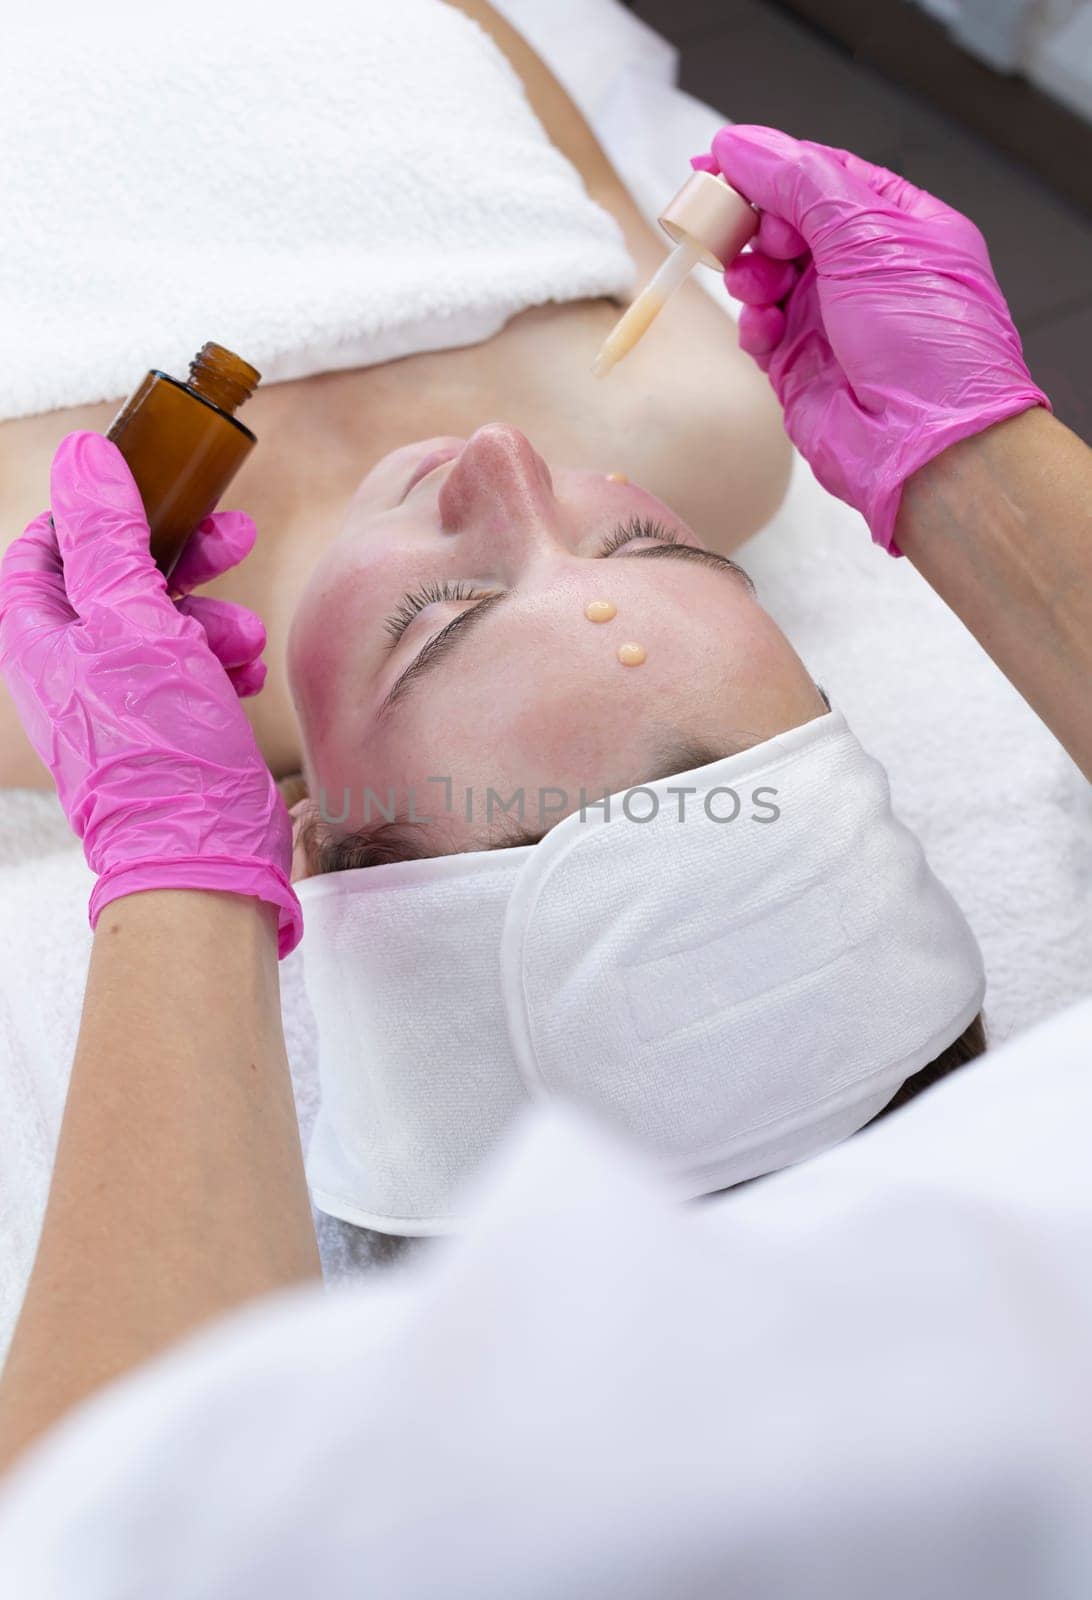 Beauty Specialist Applies Serum To Patient's Face With Pipette After Peeling Procedure In Spa Salon. Facial Skin Care With Treatment Cosmetic Oil And Serum. Woman Enjoys Skin Moisturizing Procedure.